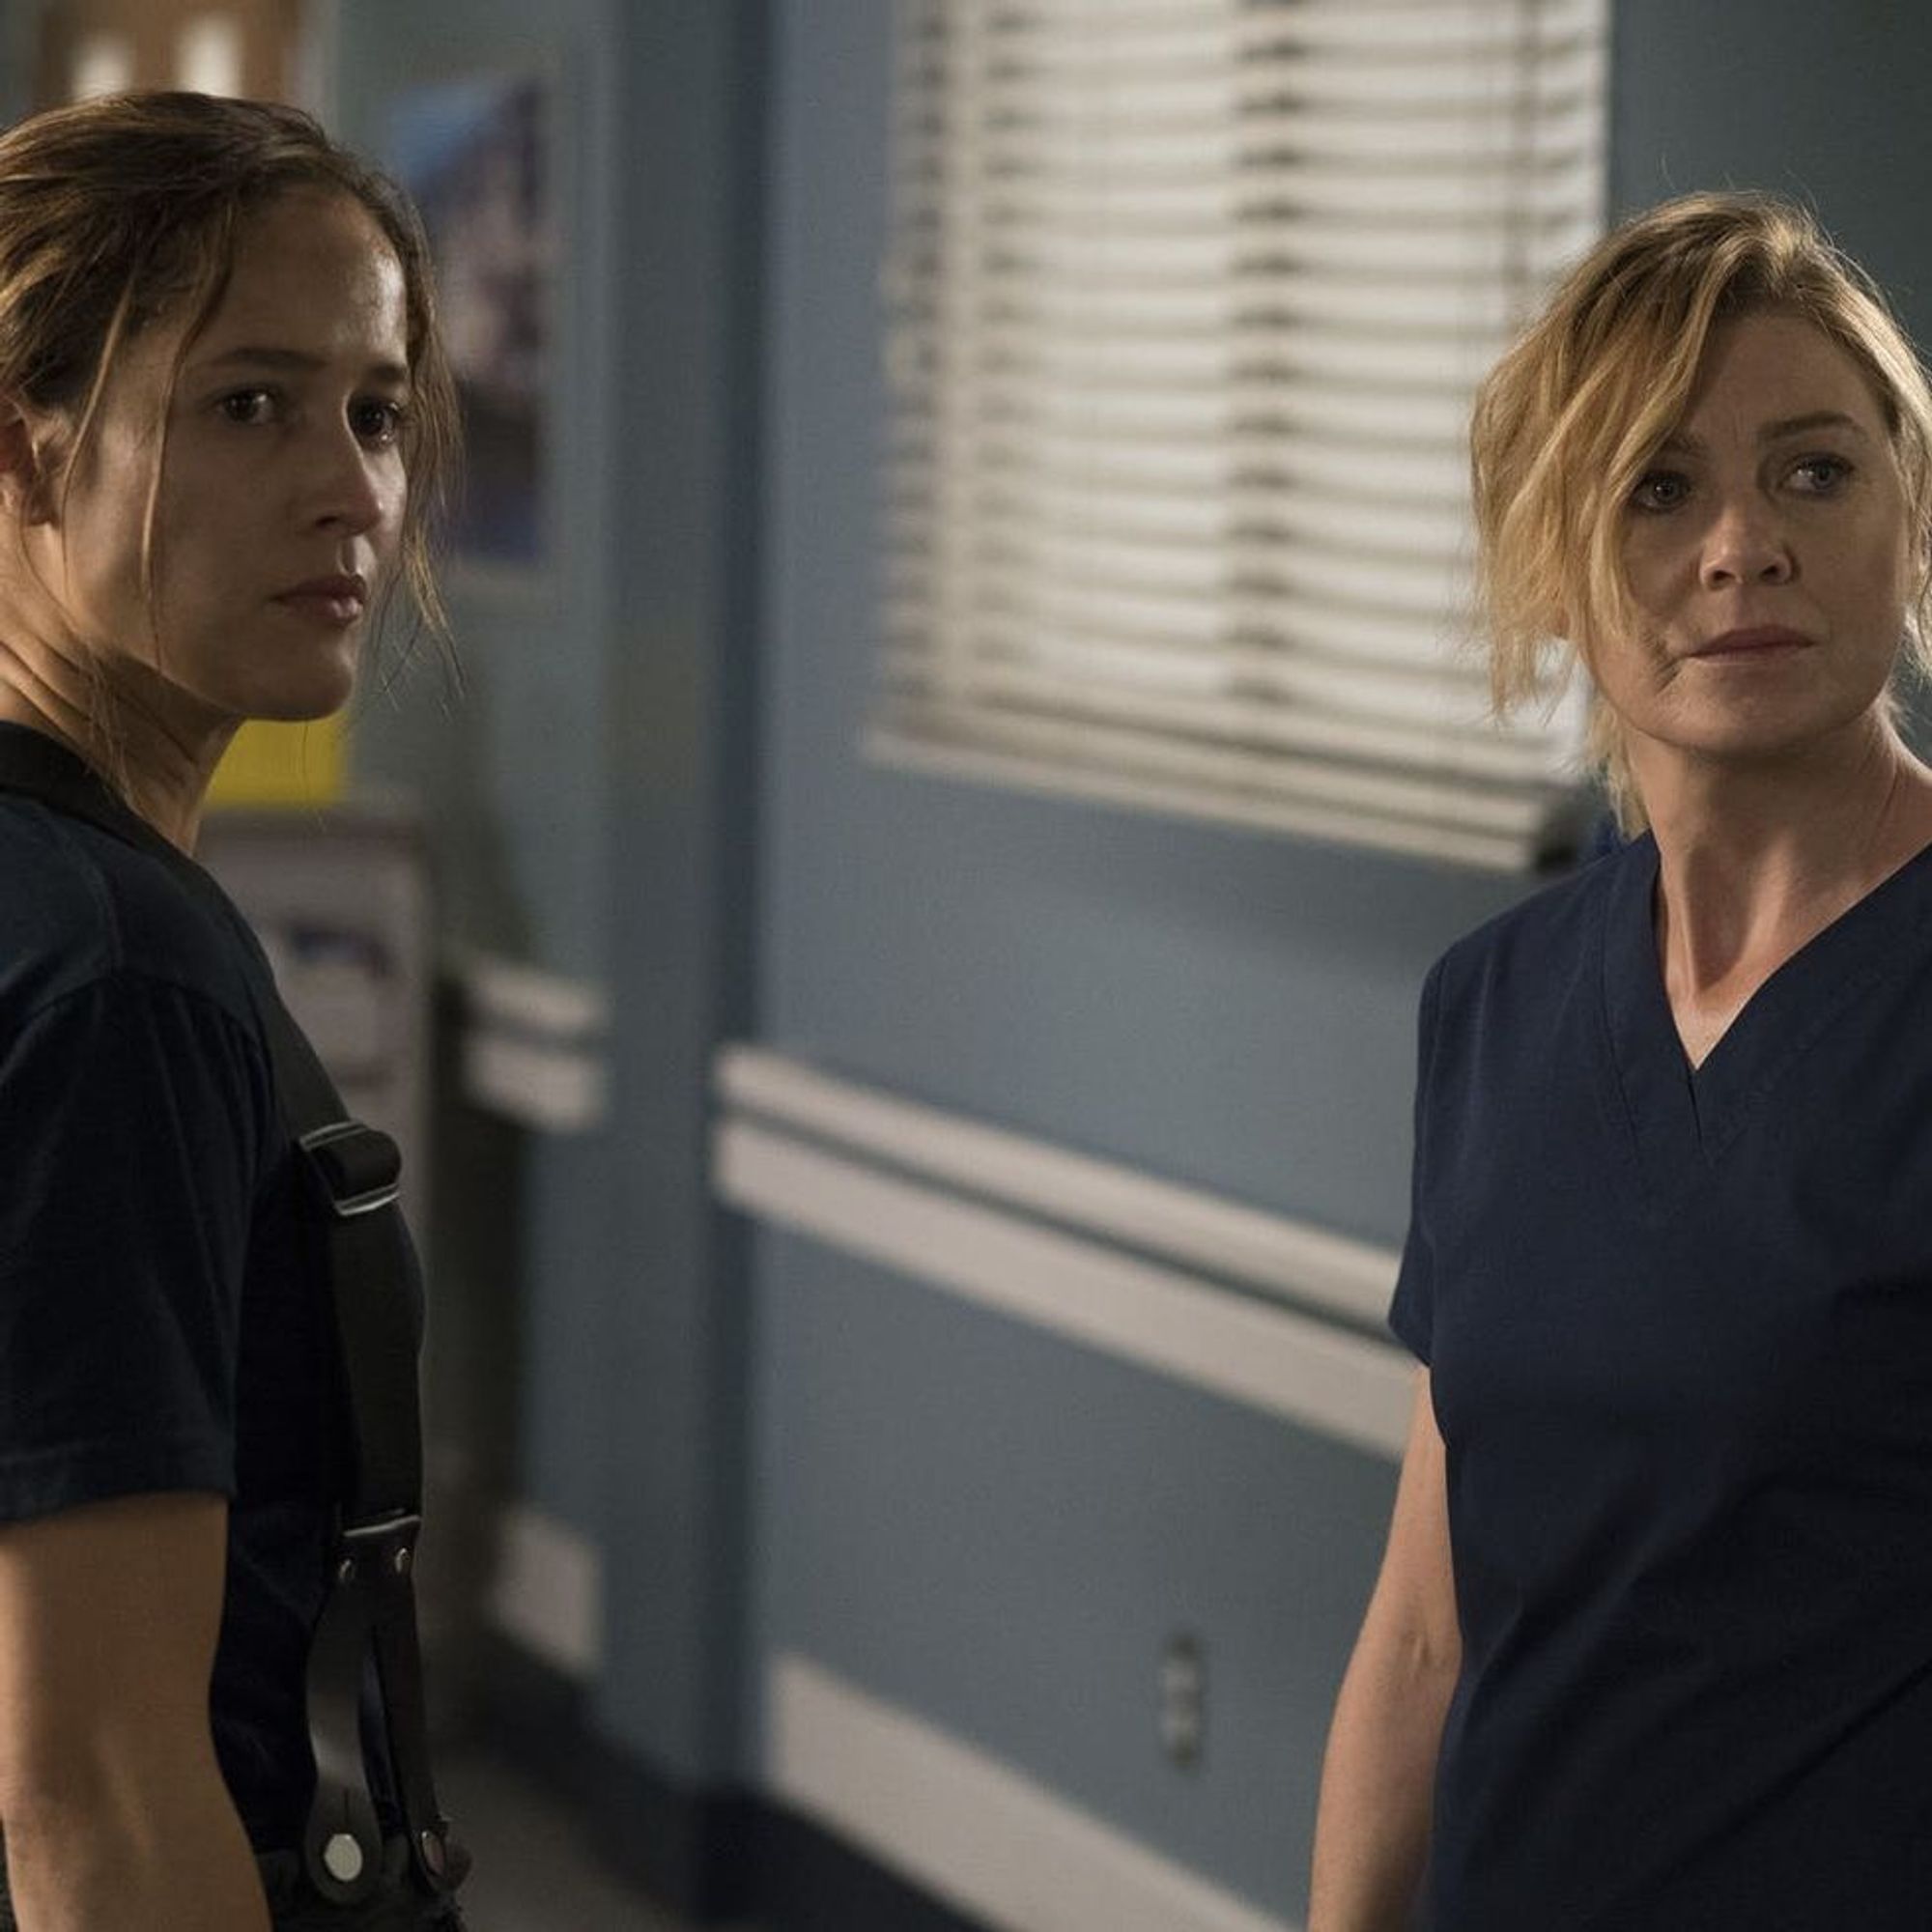 This Trailer for the ‘Grey’s Anatomy’ and ‘Station 19’ Crossover